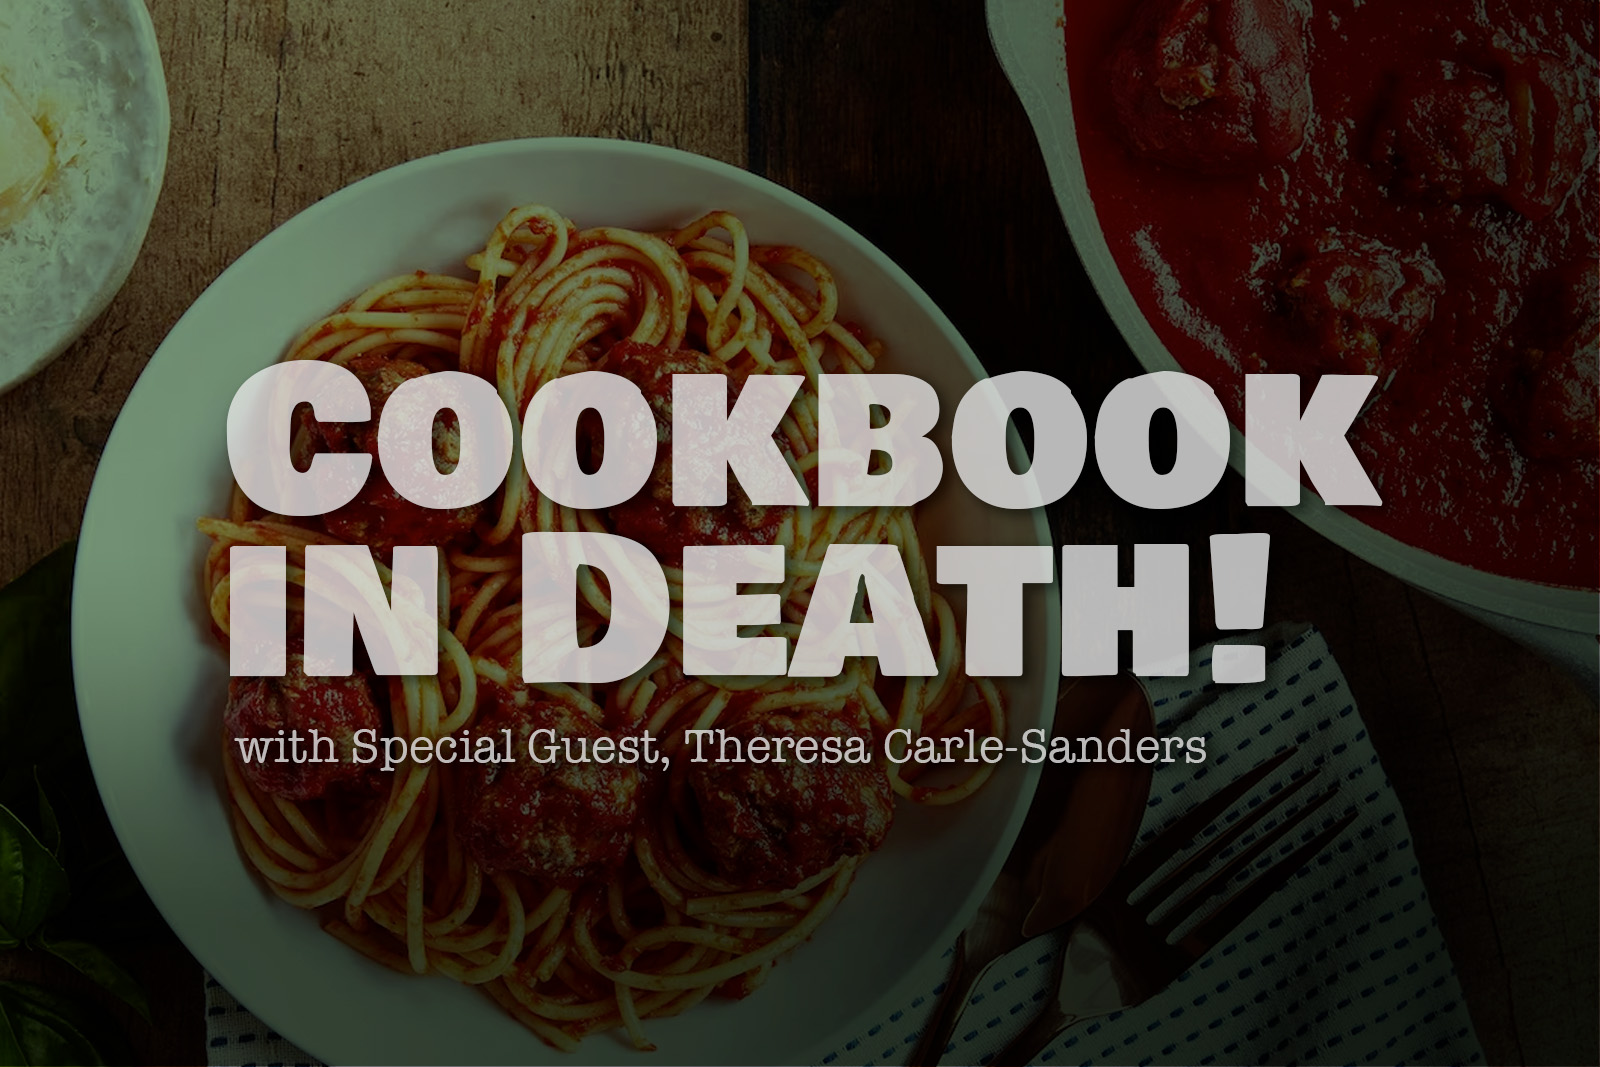 Cookbook In Death: with Special Guest Theresa Carle-Sanders